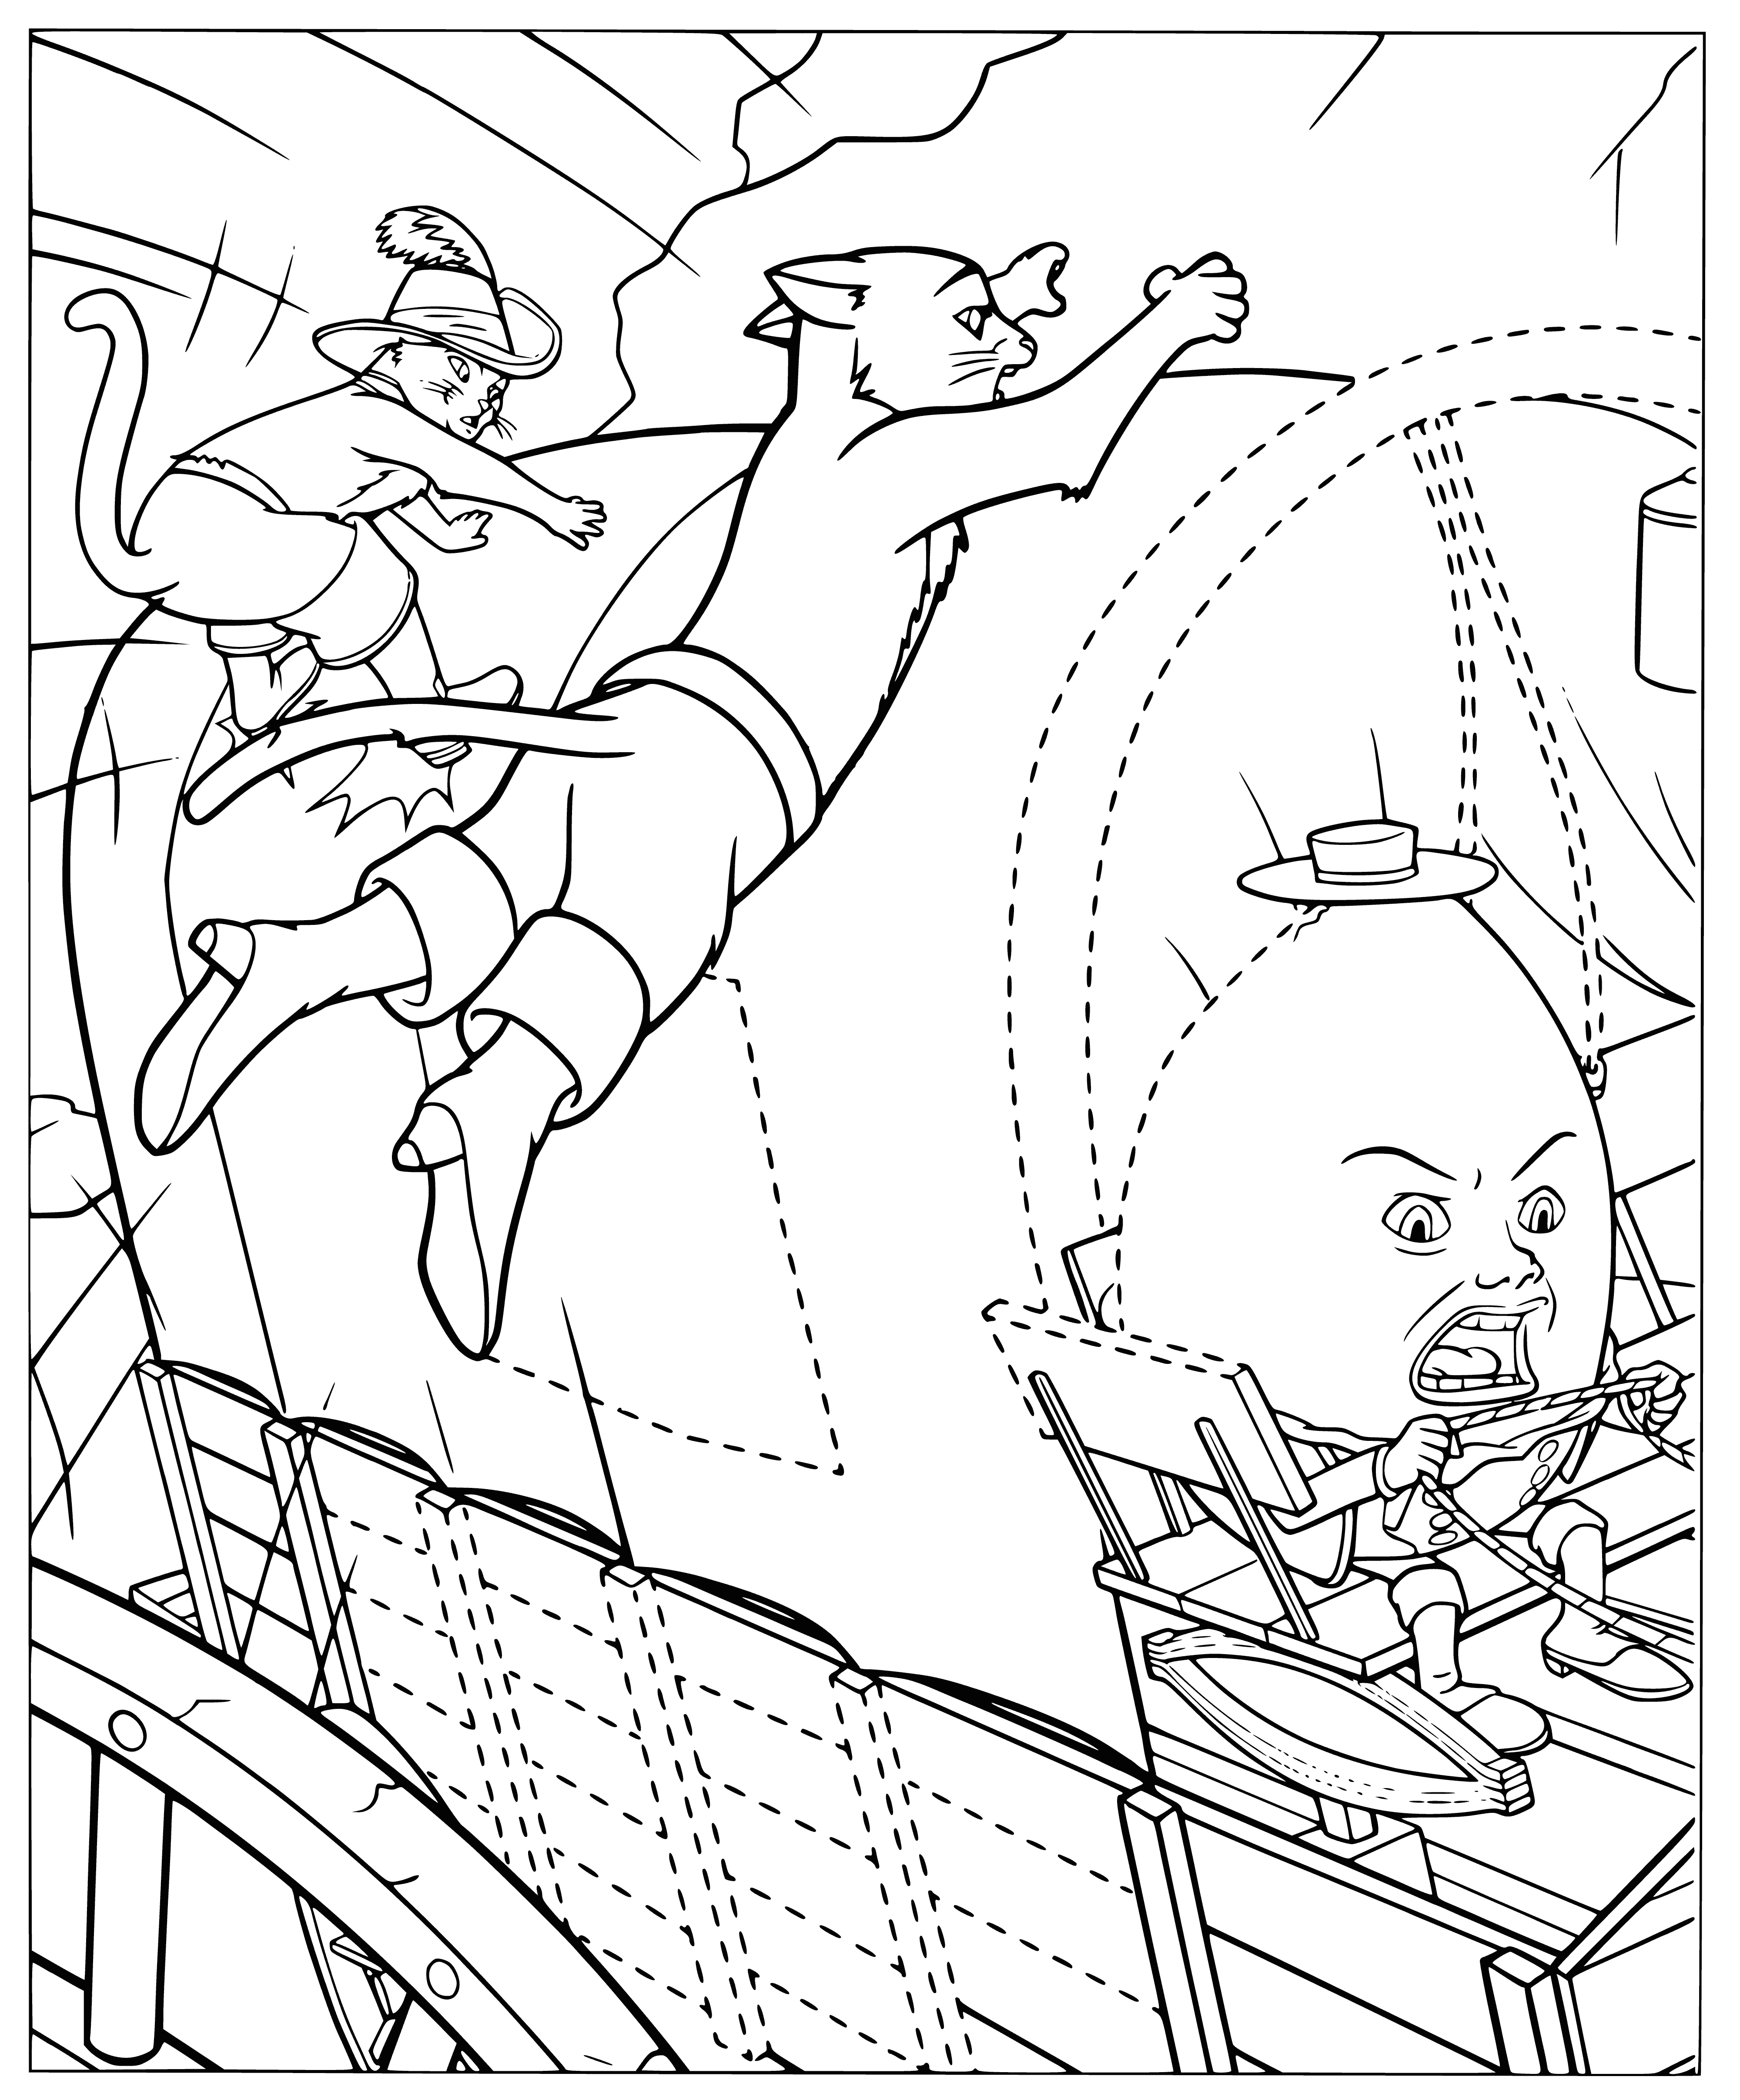 coloring page: Black cat leaping through air, body stretched out. Front paws extended, rear tucked in, tail streaming behind. Ears flat, eyes narrowed in concentration.